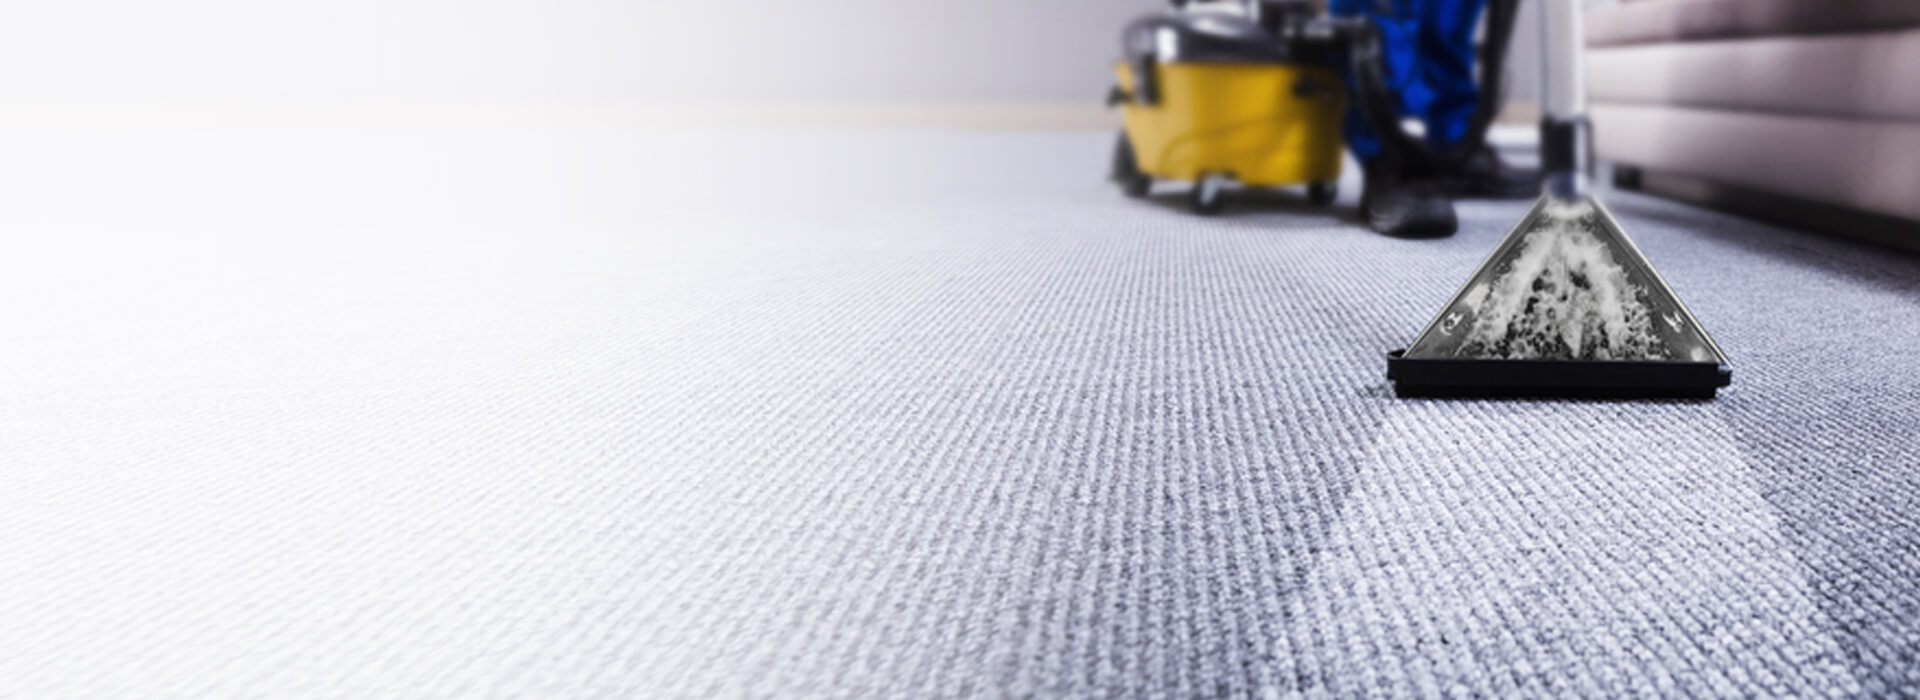 Carpet Cleaning Near Me